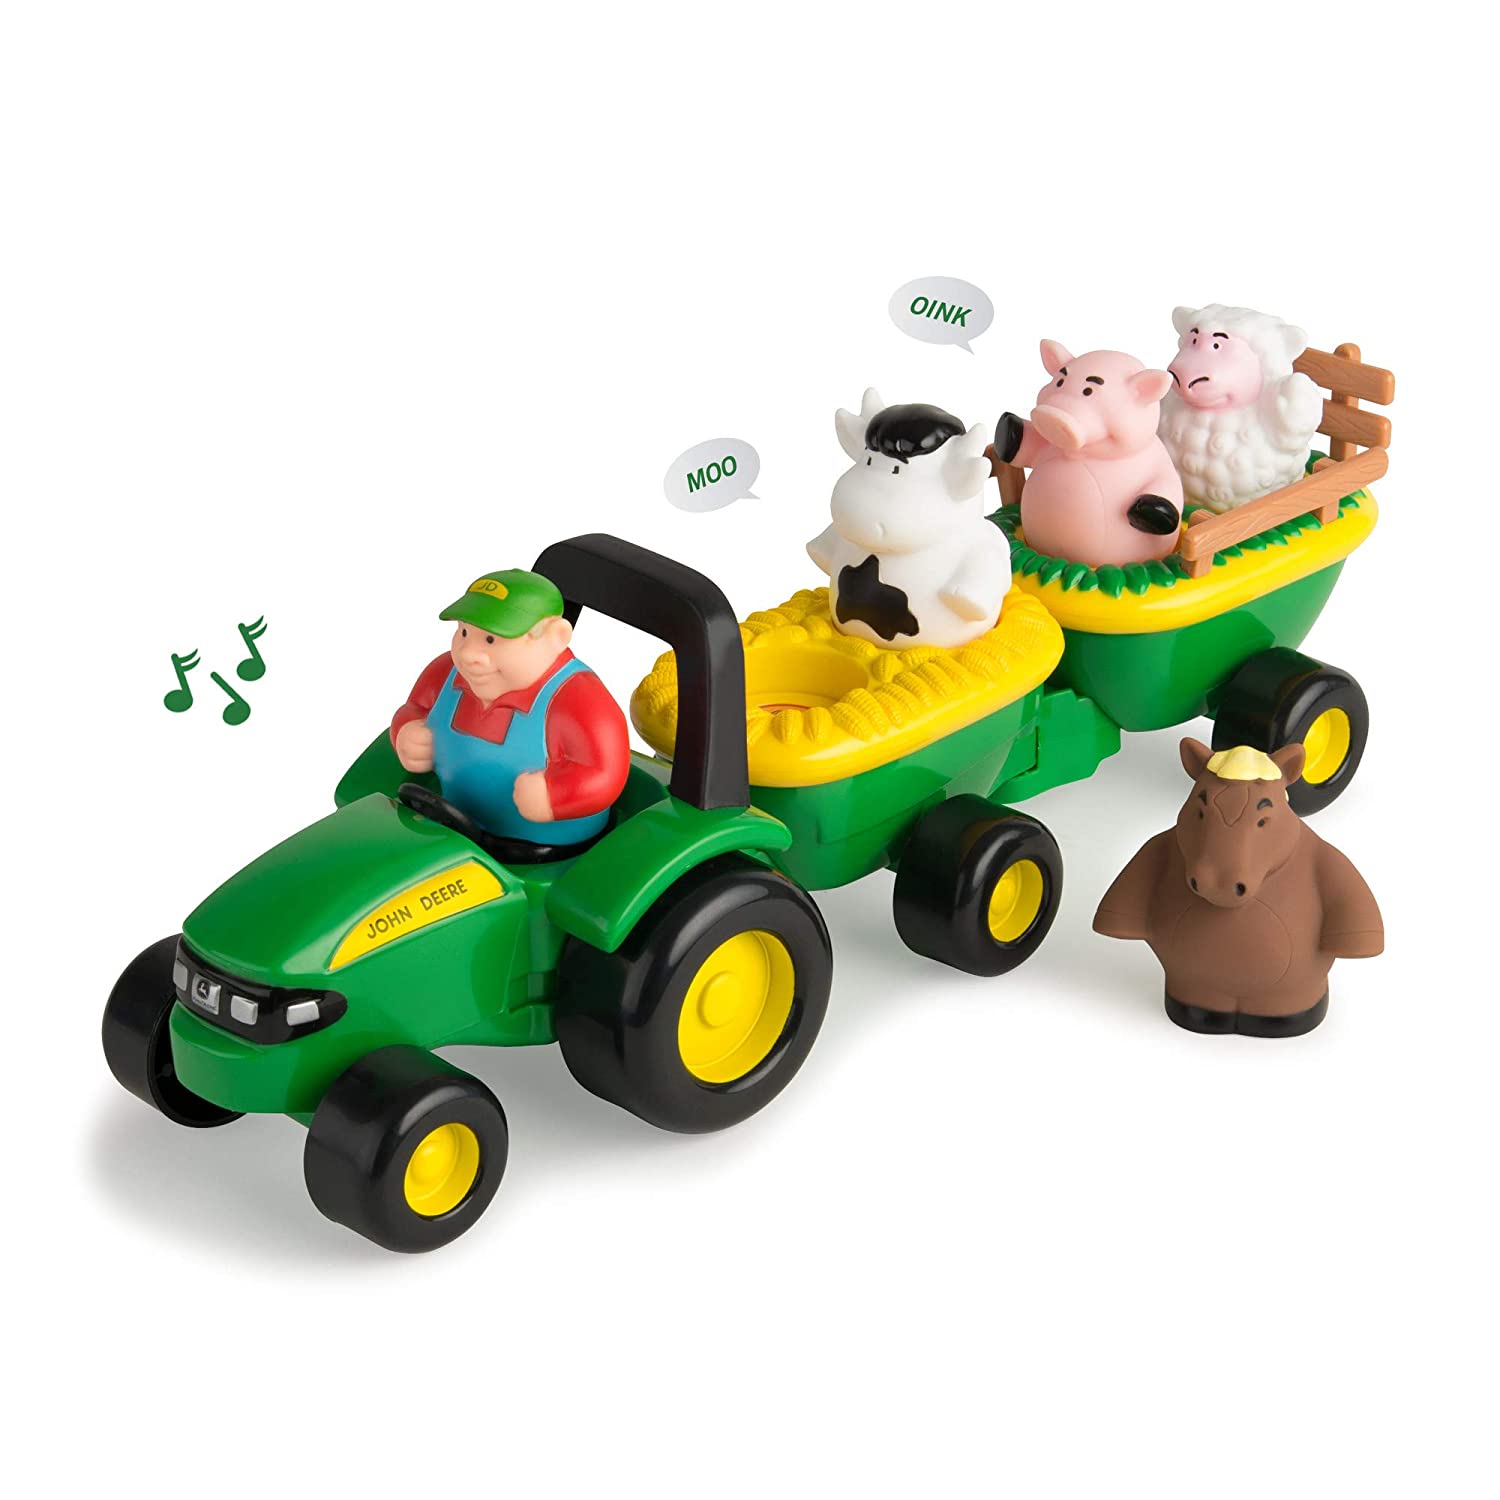 9 Best Farm Animal Toys for Toddlers 2023 - Buying Guide 7